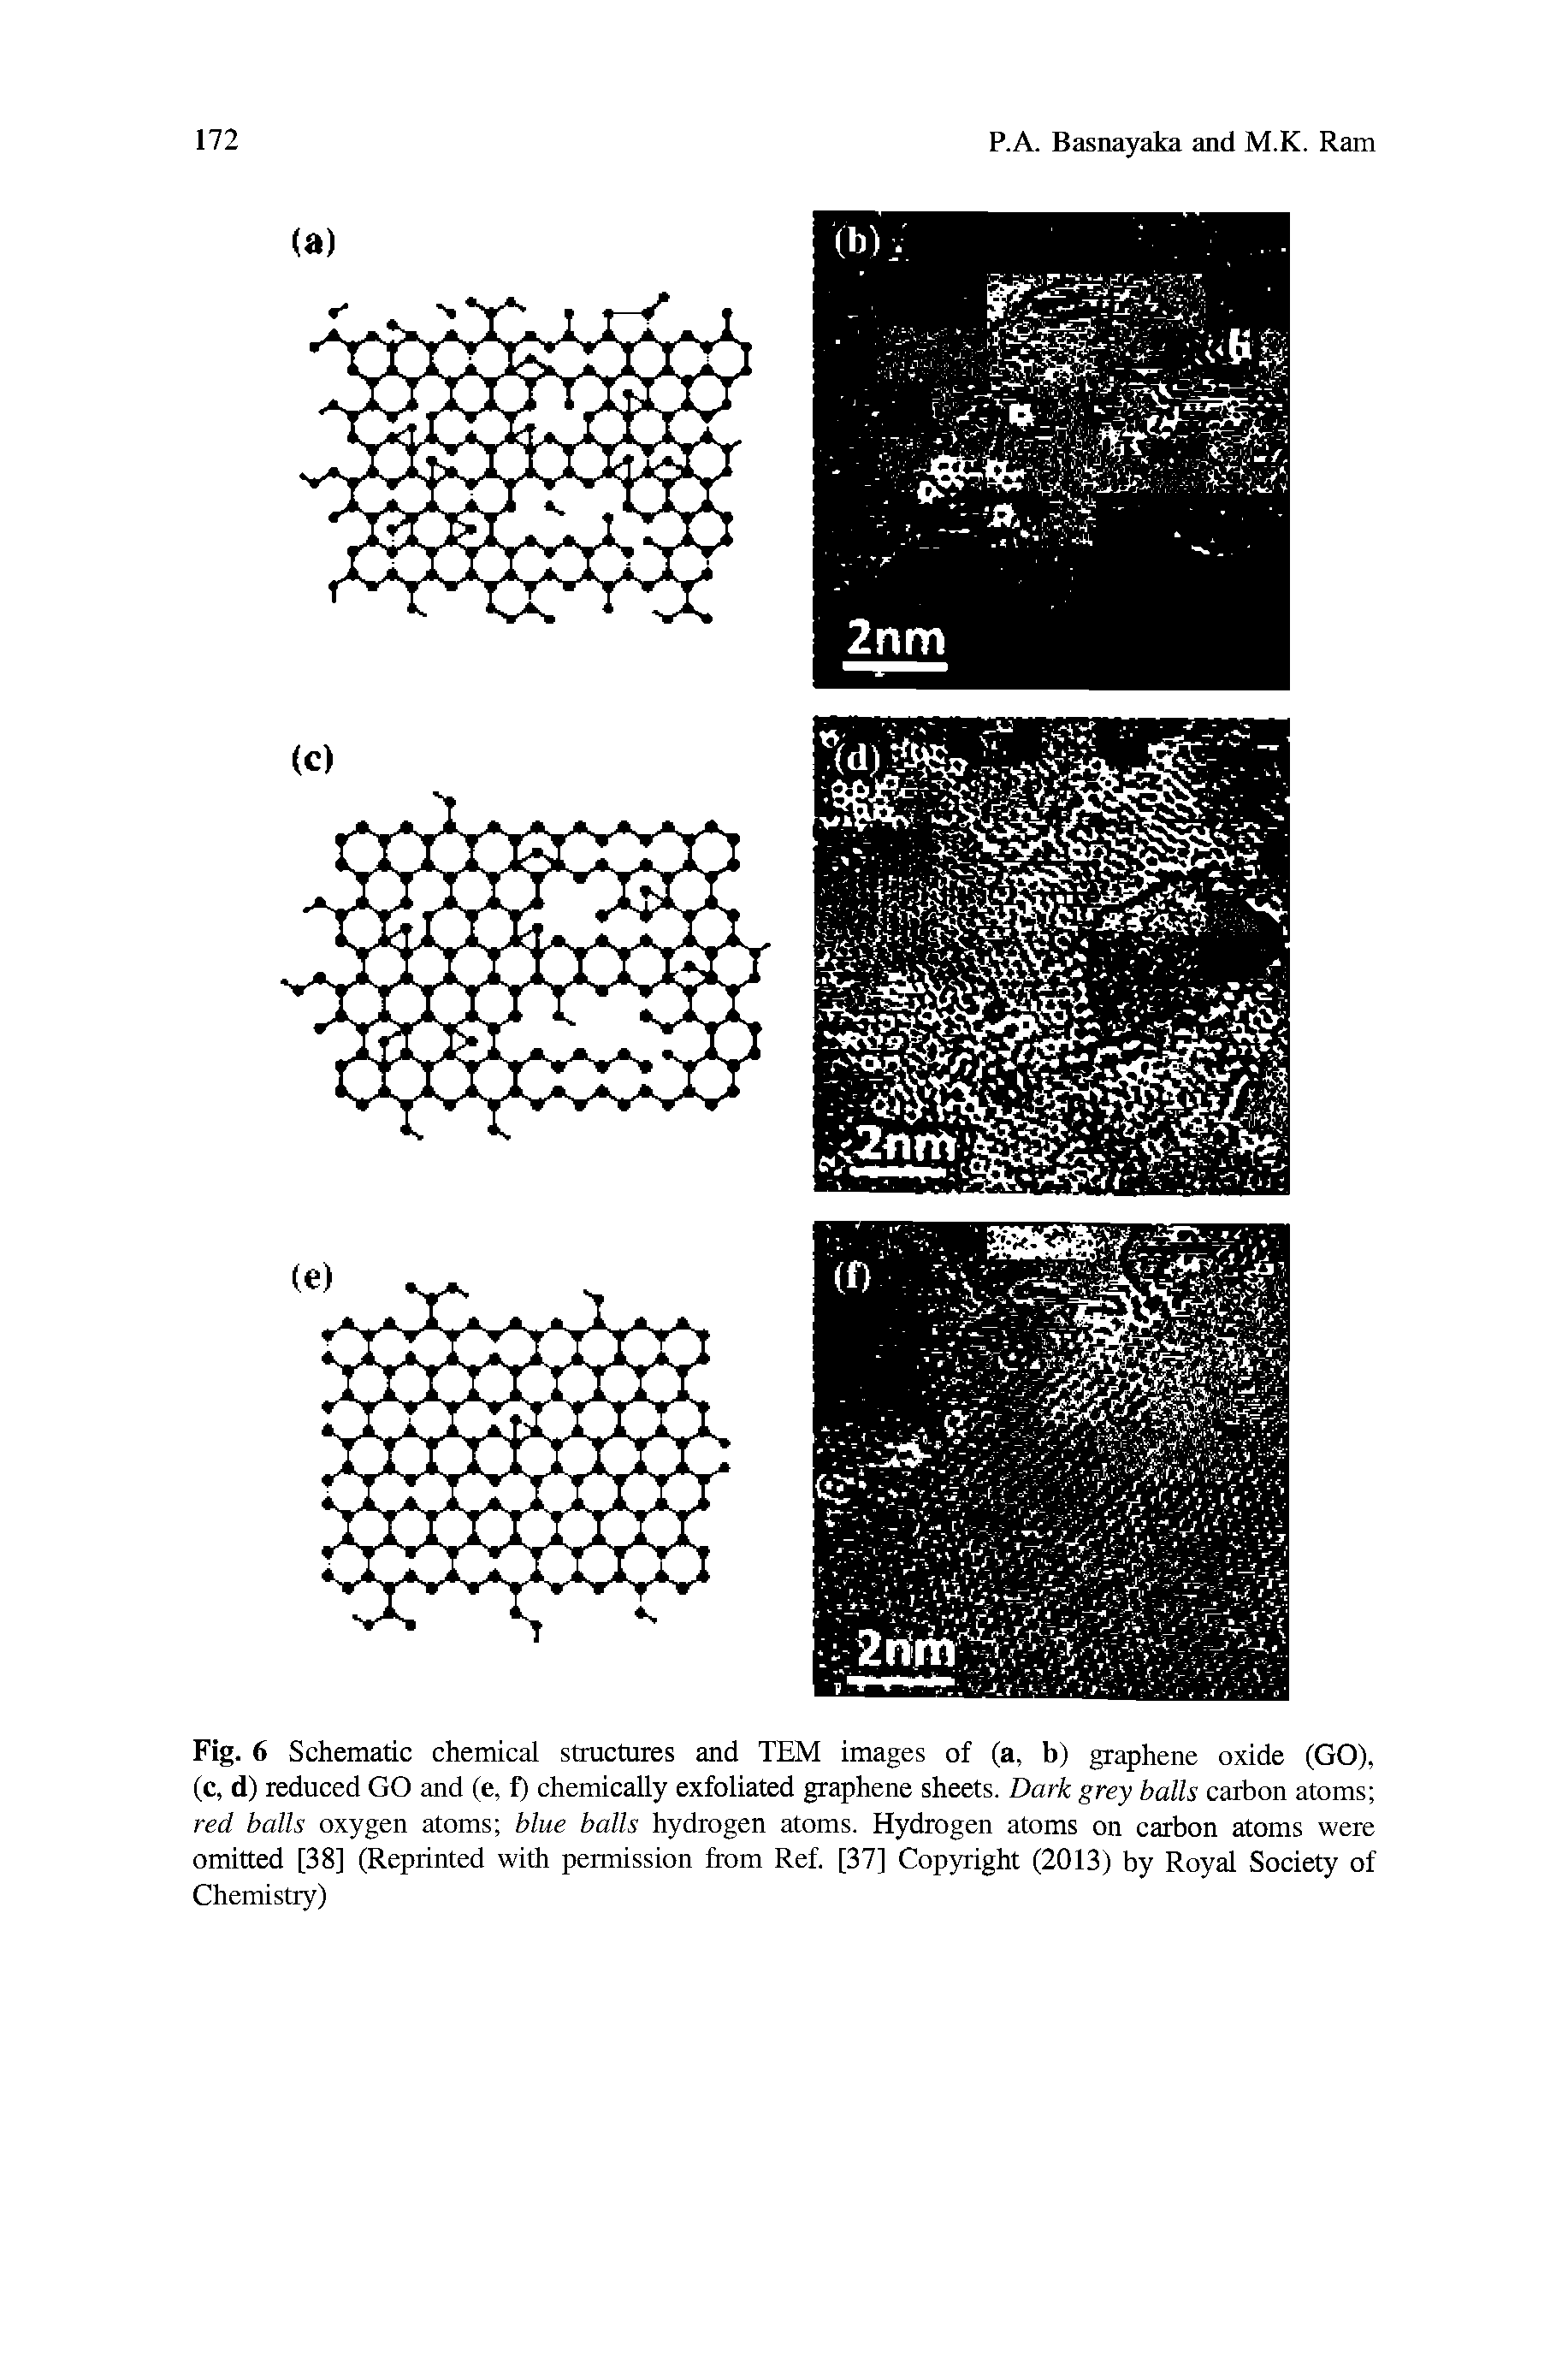 Fig. 6 Schematic chemical structures and TEM images of (a, b) graphene oxide (GO), (c, d) reduced GO and (e, f) chemically exfoliated graphene sheets. Dark grey balls carbon atoms red balls oxygen atoms blue balls hydrogen atoms. Hydrogen atoms on carbon atoms were omitted [38] (Reprinted with permission from Ref. [37] Copyright (2013) by Royal Society of Chemistry)...